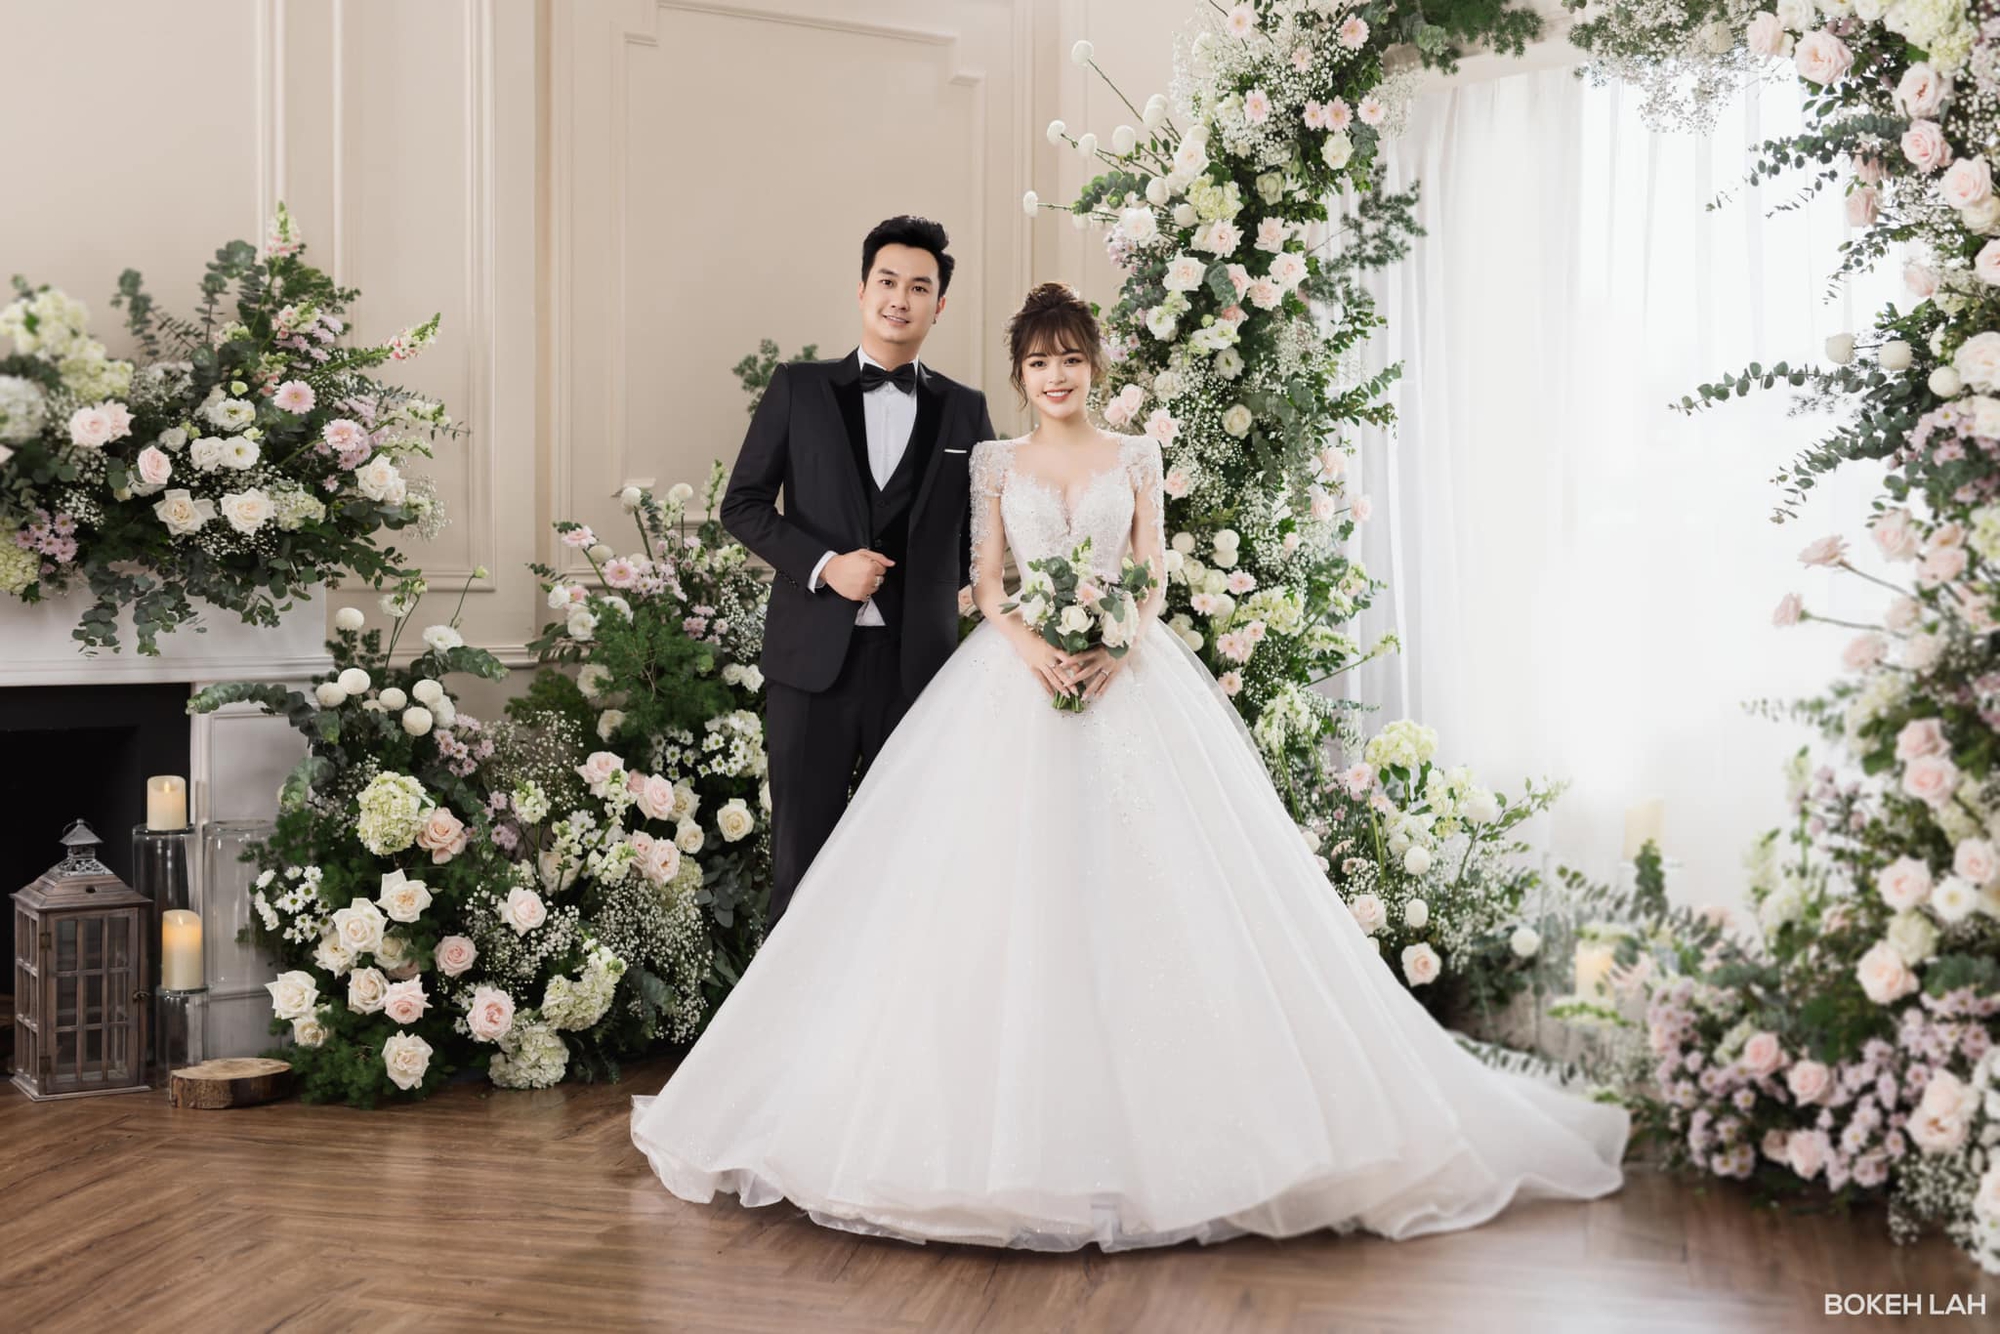 Male star Vbiz released a dreamy set of wedding photos before G: Groom's dazzling style, 2K1 girlfriend's beauty caused a fever - Photo 2.